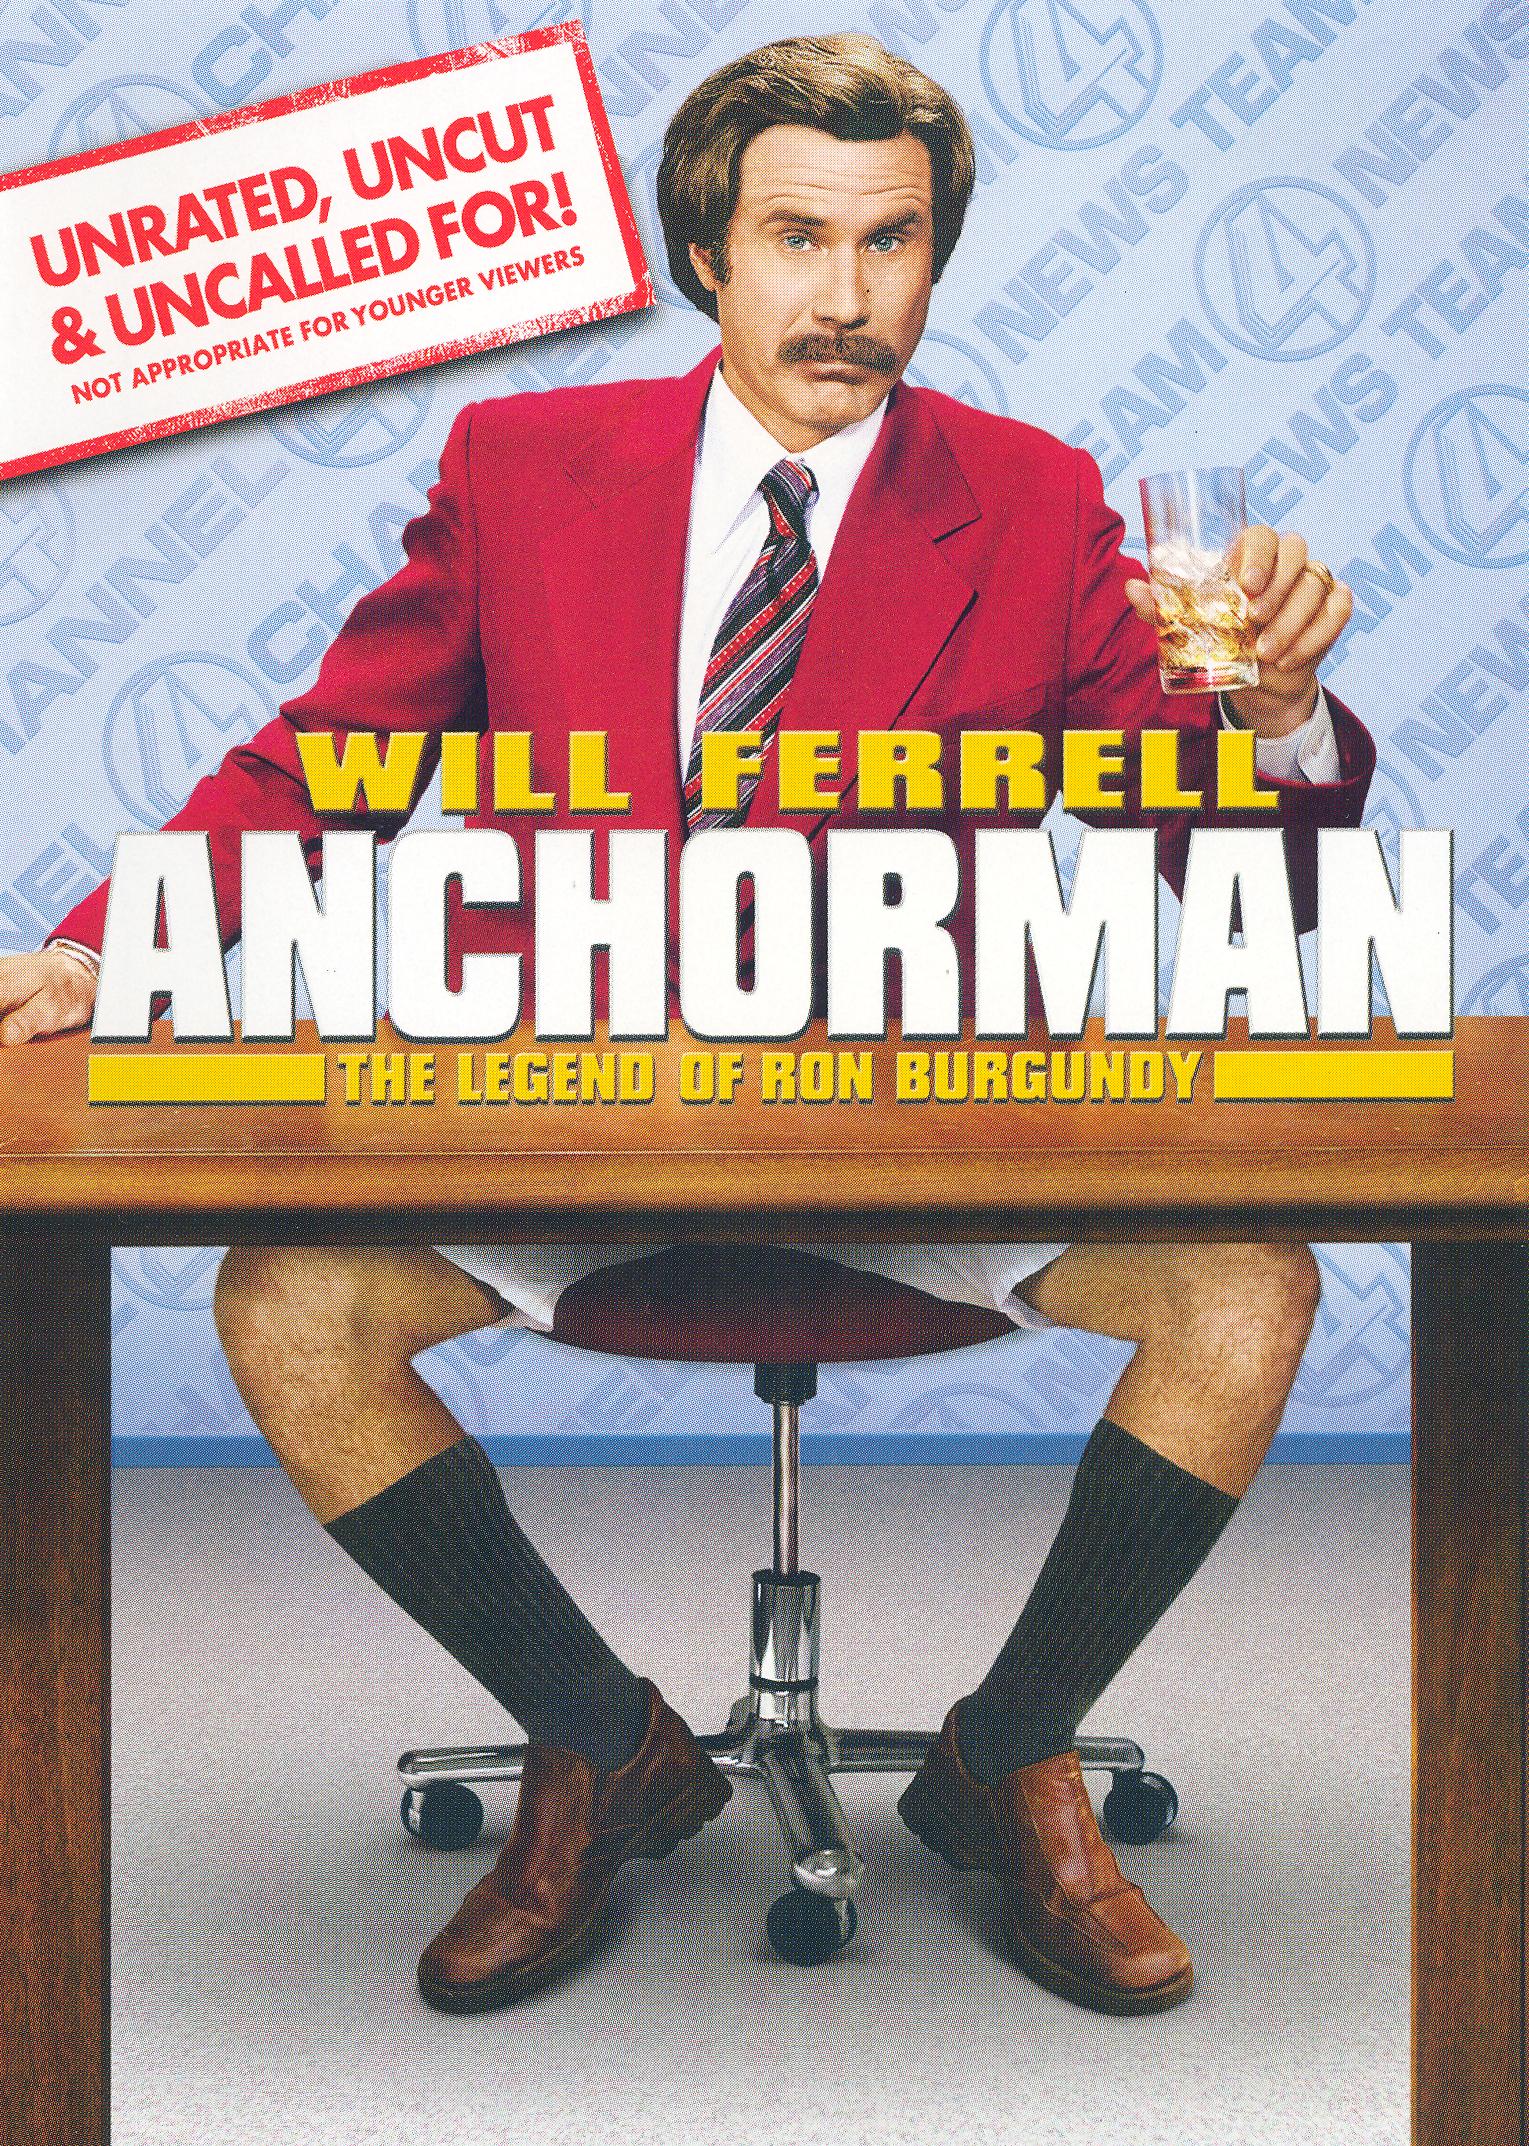 Anchorman: The Legend of Ron Burgundy [WS] [Unrated, Uncut & Uncalled For!] [DVD] [2004]